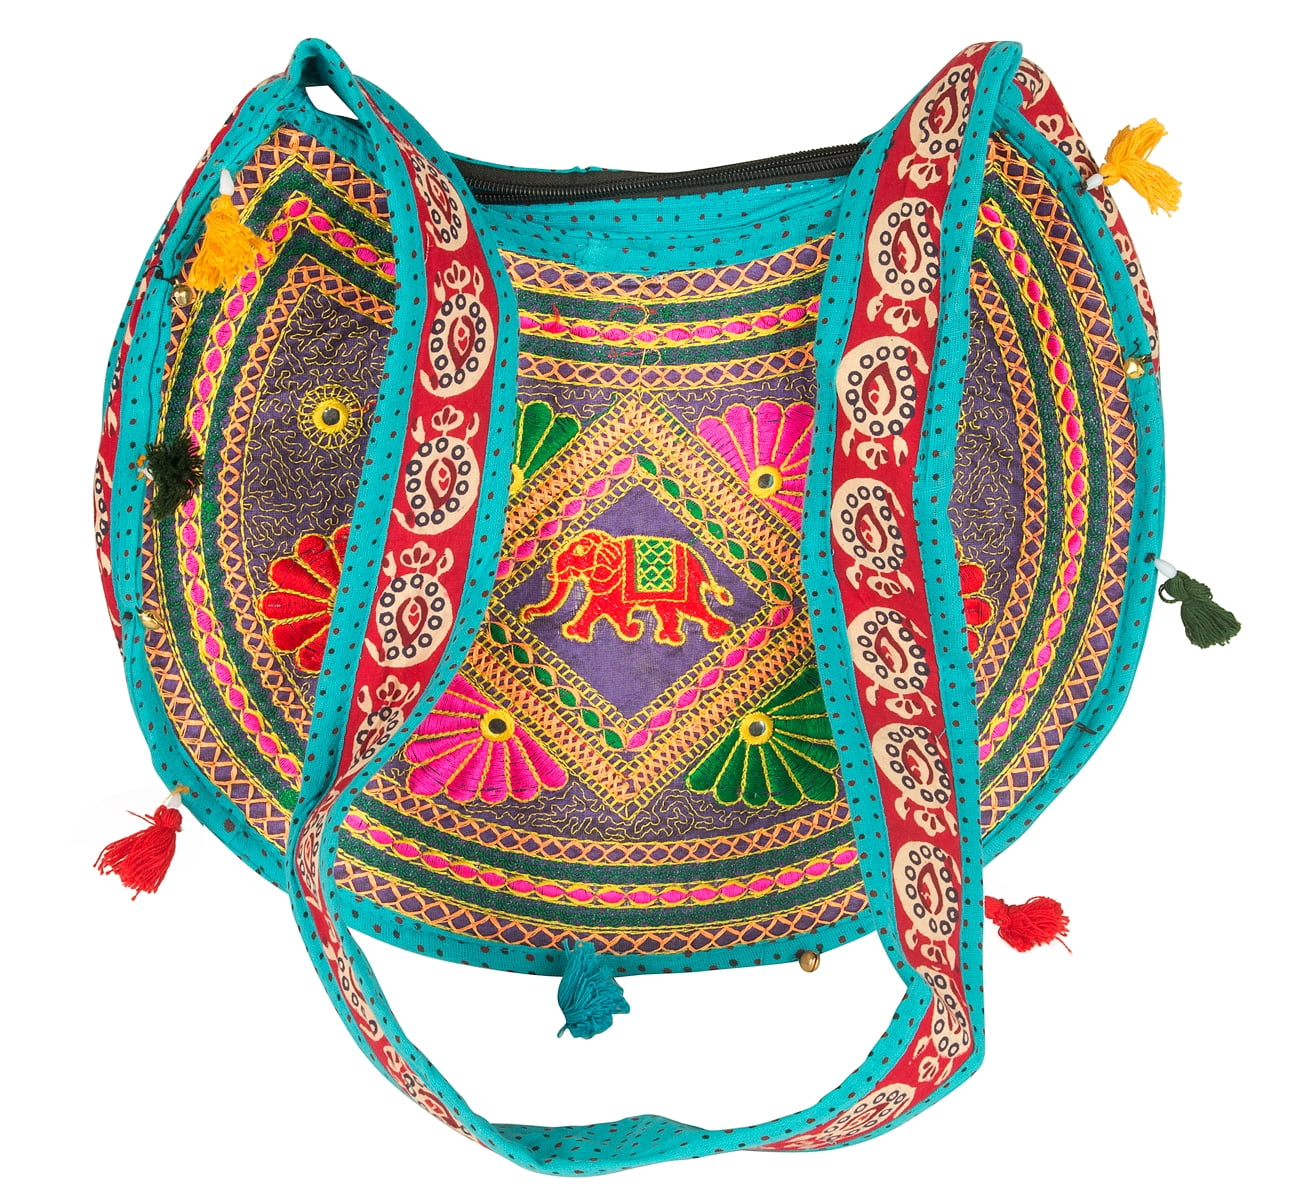 Details about   New Hippie Handmade Patchwork Razorcut Shoulder bag Boho Cross body Square Patch 